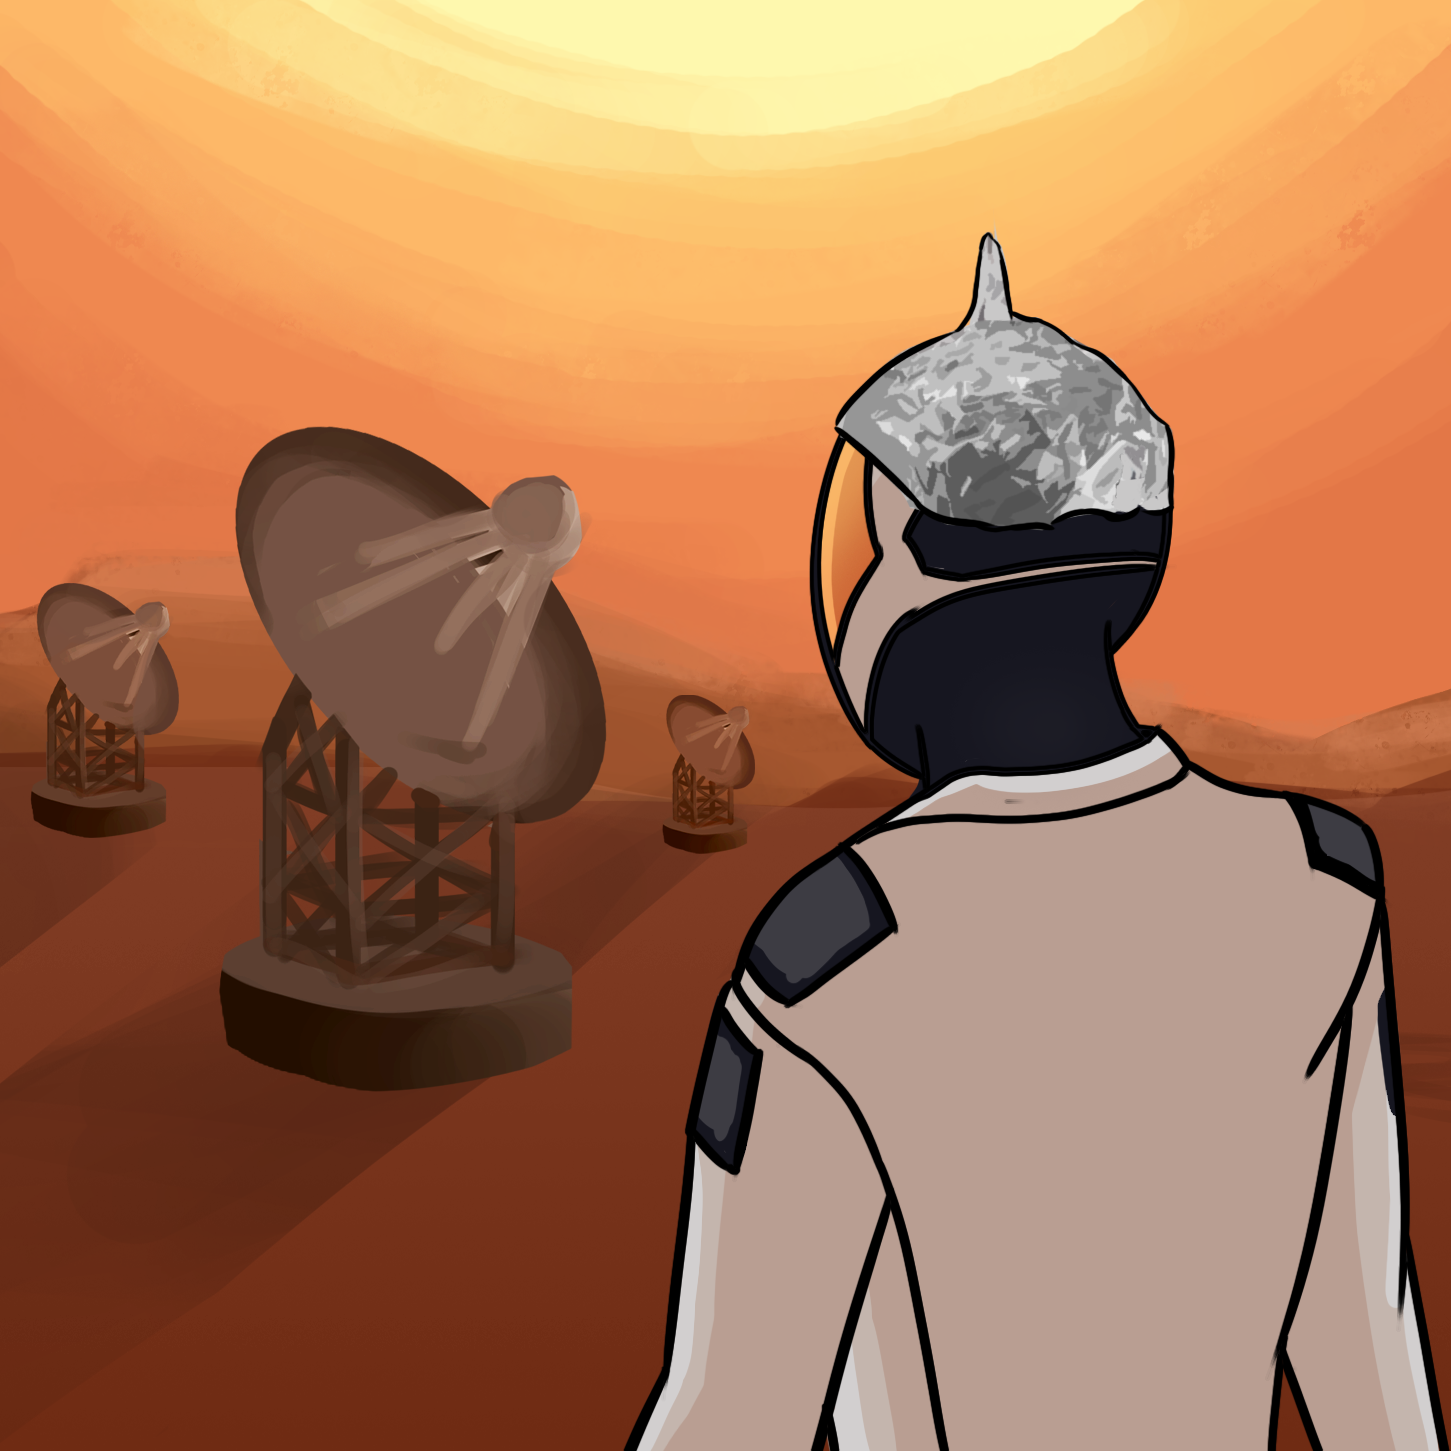 Occupy Mars: The Game 5G Network Achievement